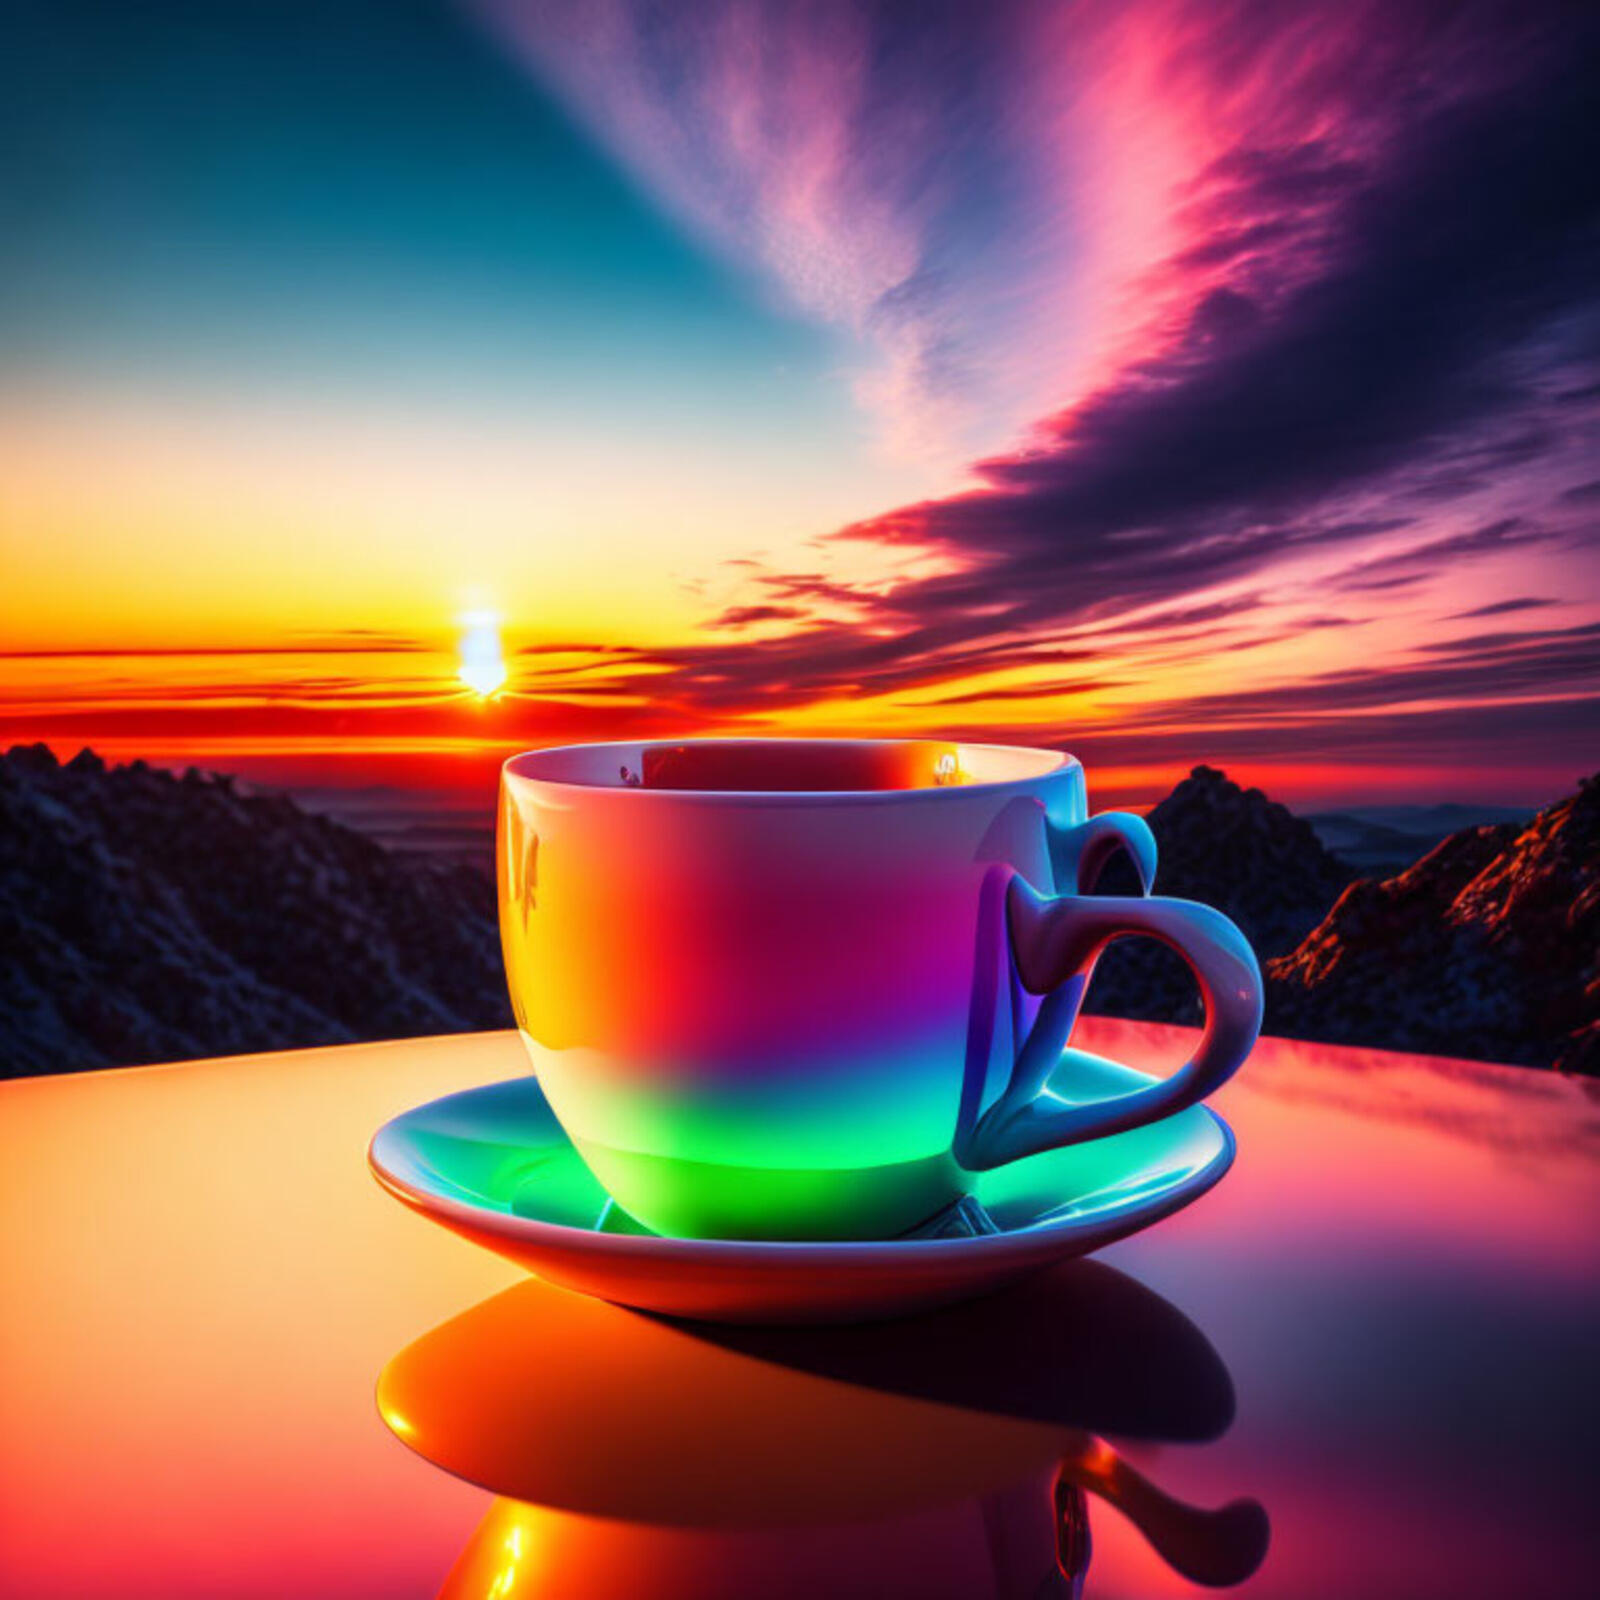 Free photo A fantastically colorful cup of coffee at dawn